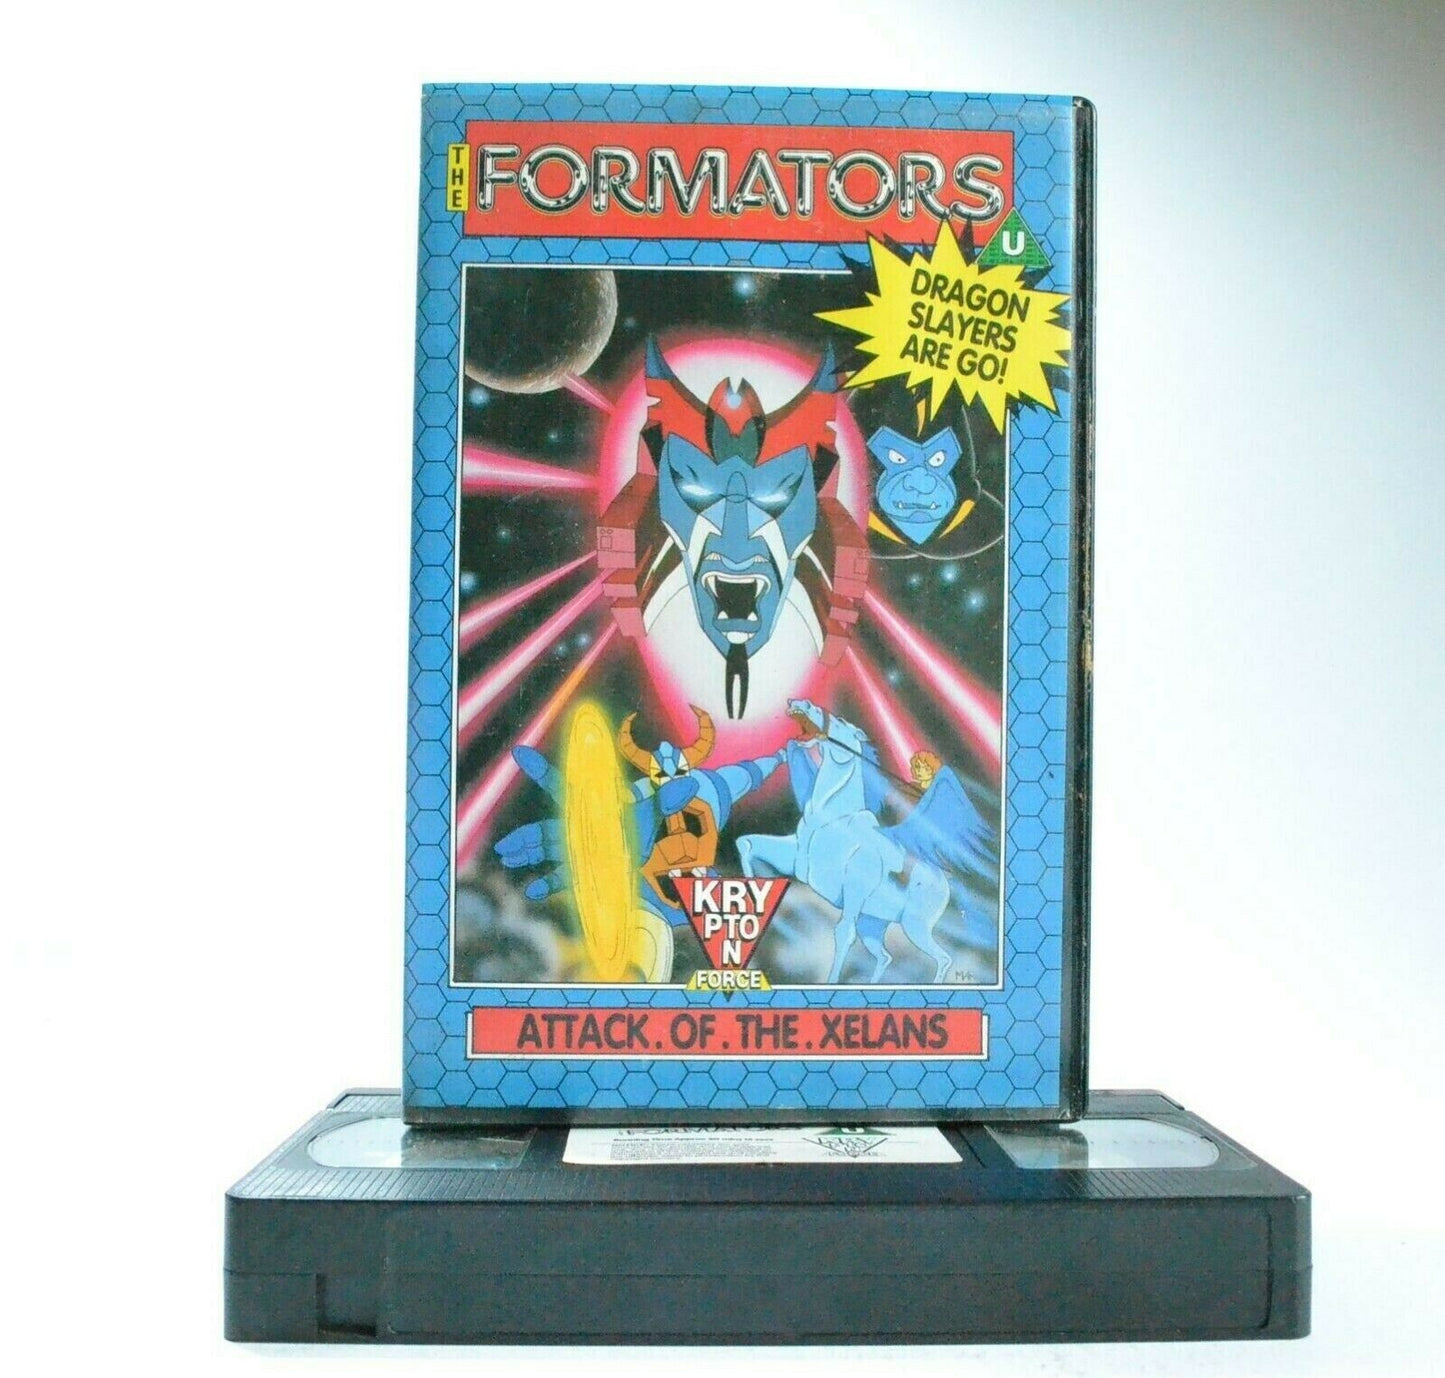 The Formators: Attack Of The Xelans - Sci-Fi/Action - Animated - Kids - Pal VHS-